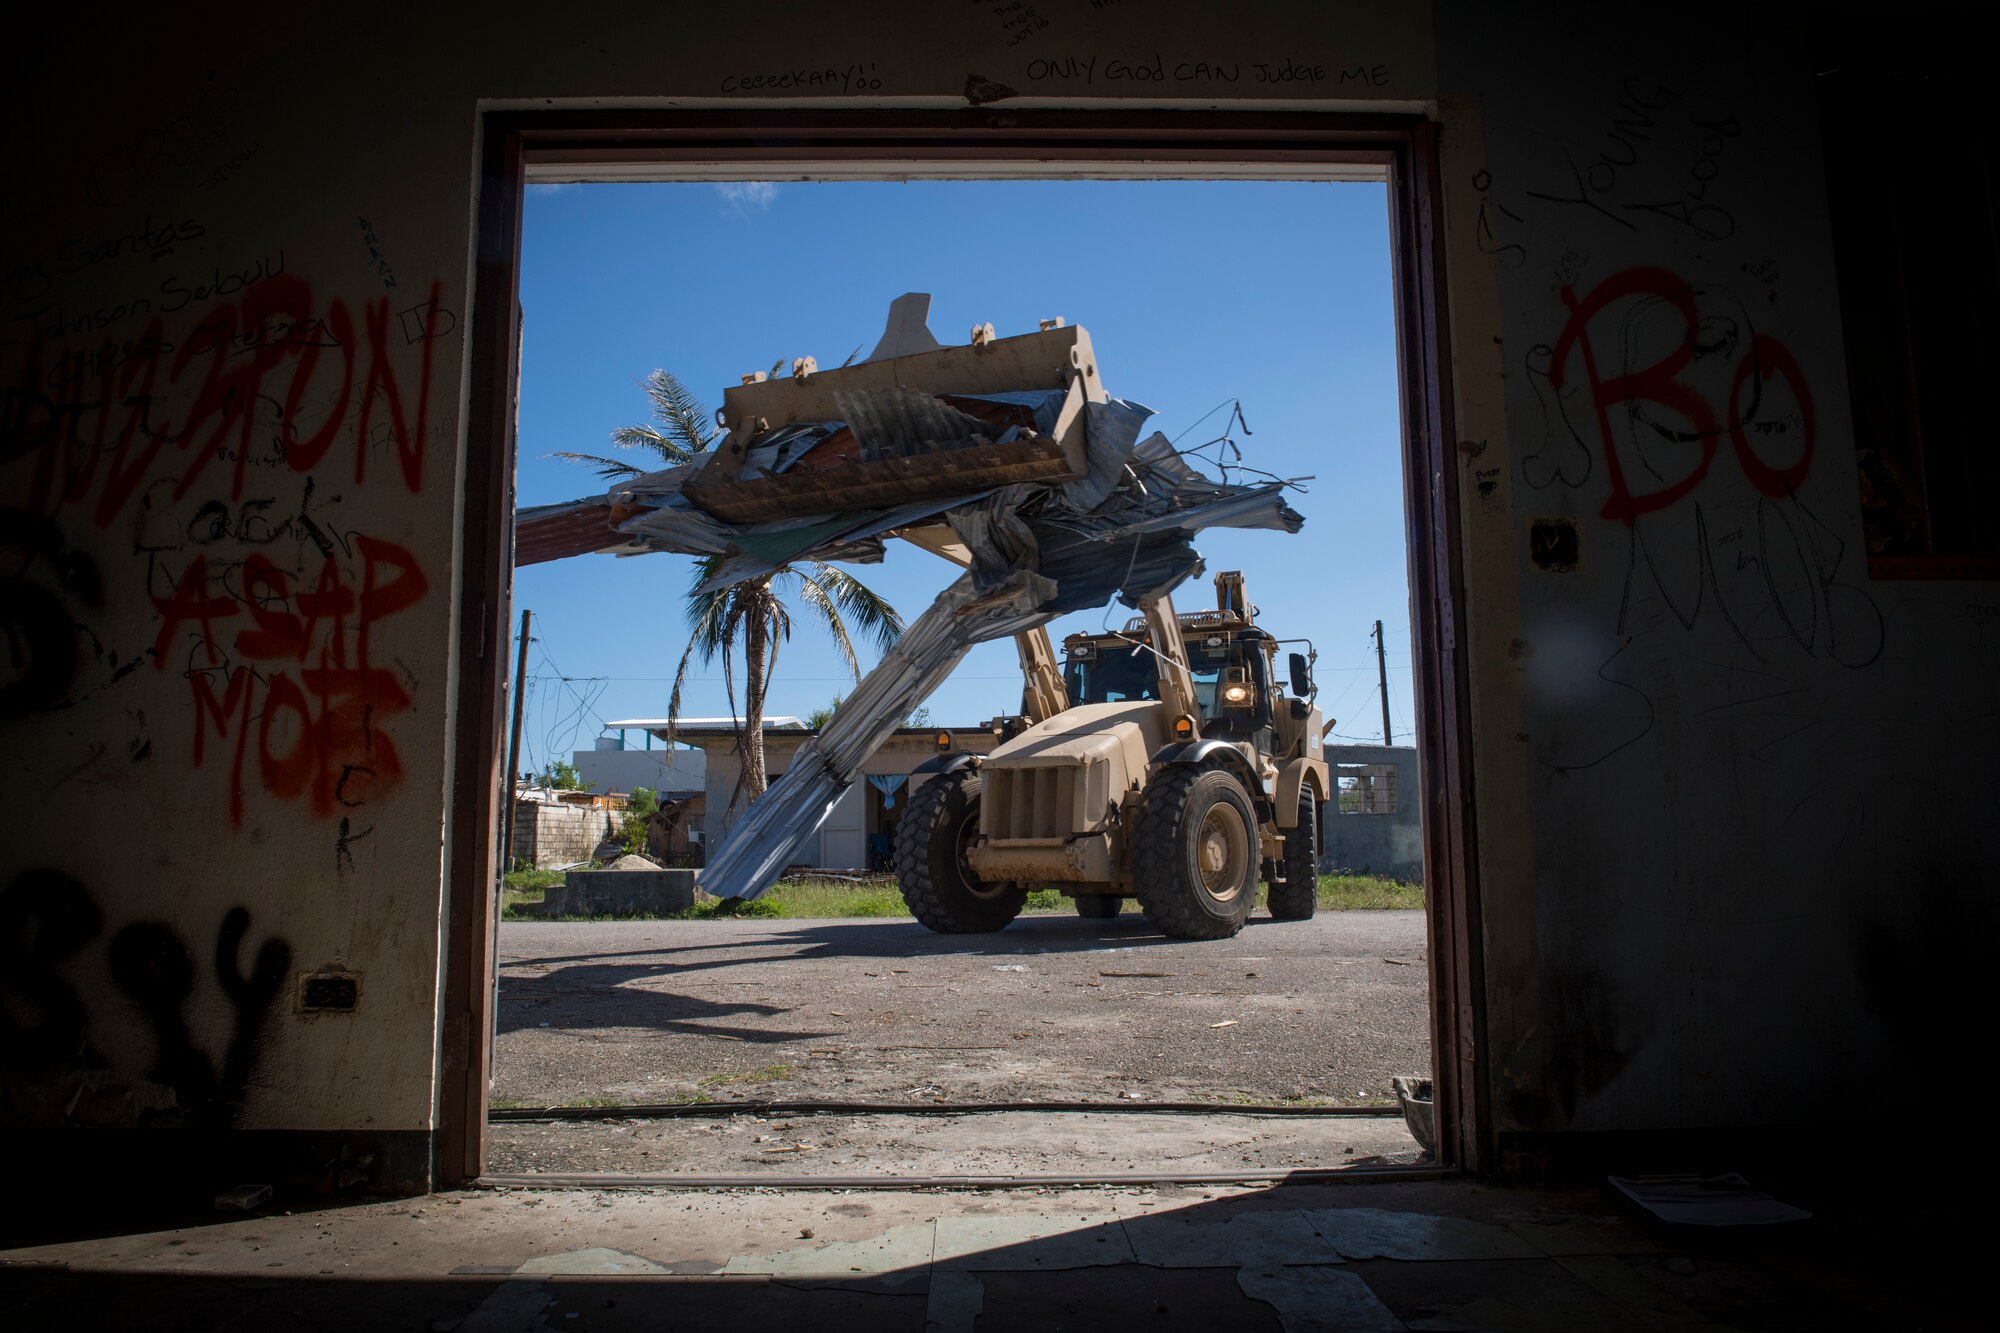 Pvt. Joseph Mafnas, 1224th Engineer Support Company, uses a high mobility evacuation equipment vehicle to remove debris from a street in the village of Chalan Kanoa, Saipan, Commonwealth of the Northern Mariana Islands, Nov. 20, 2018.